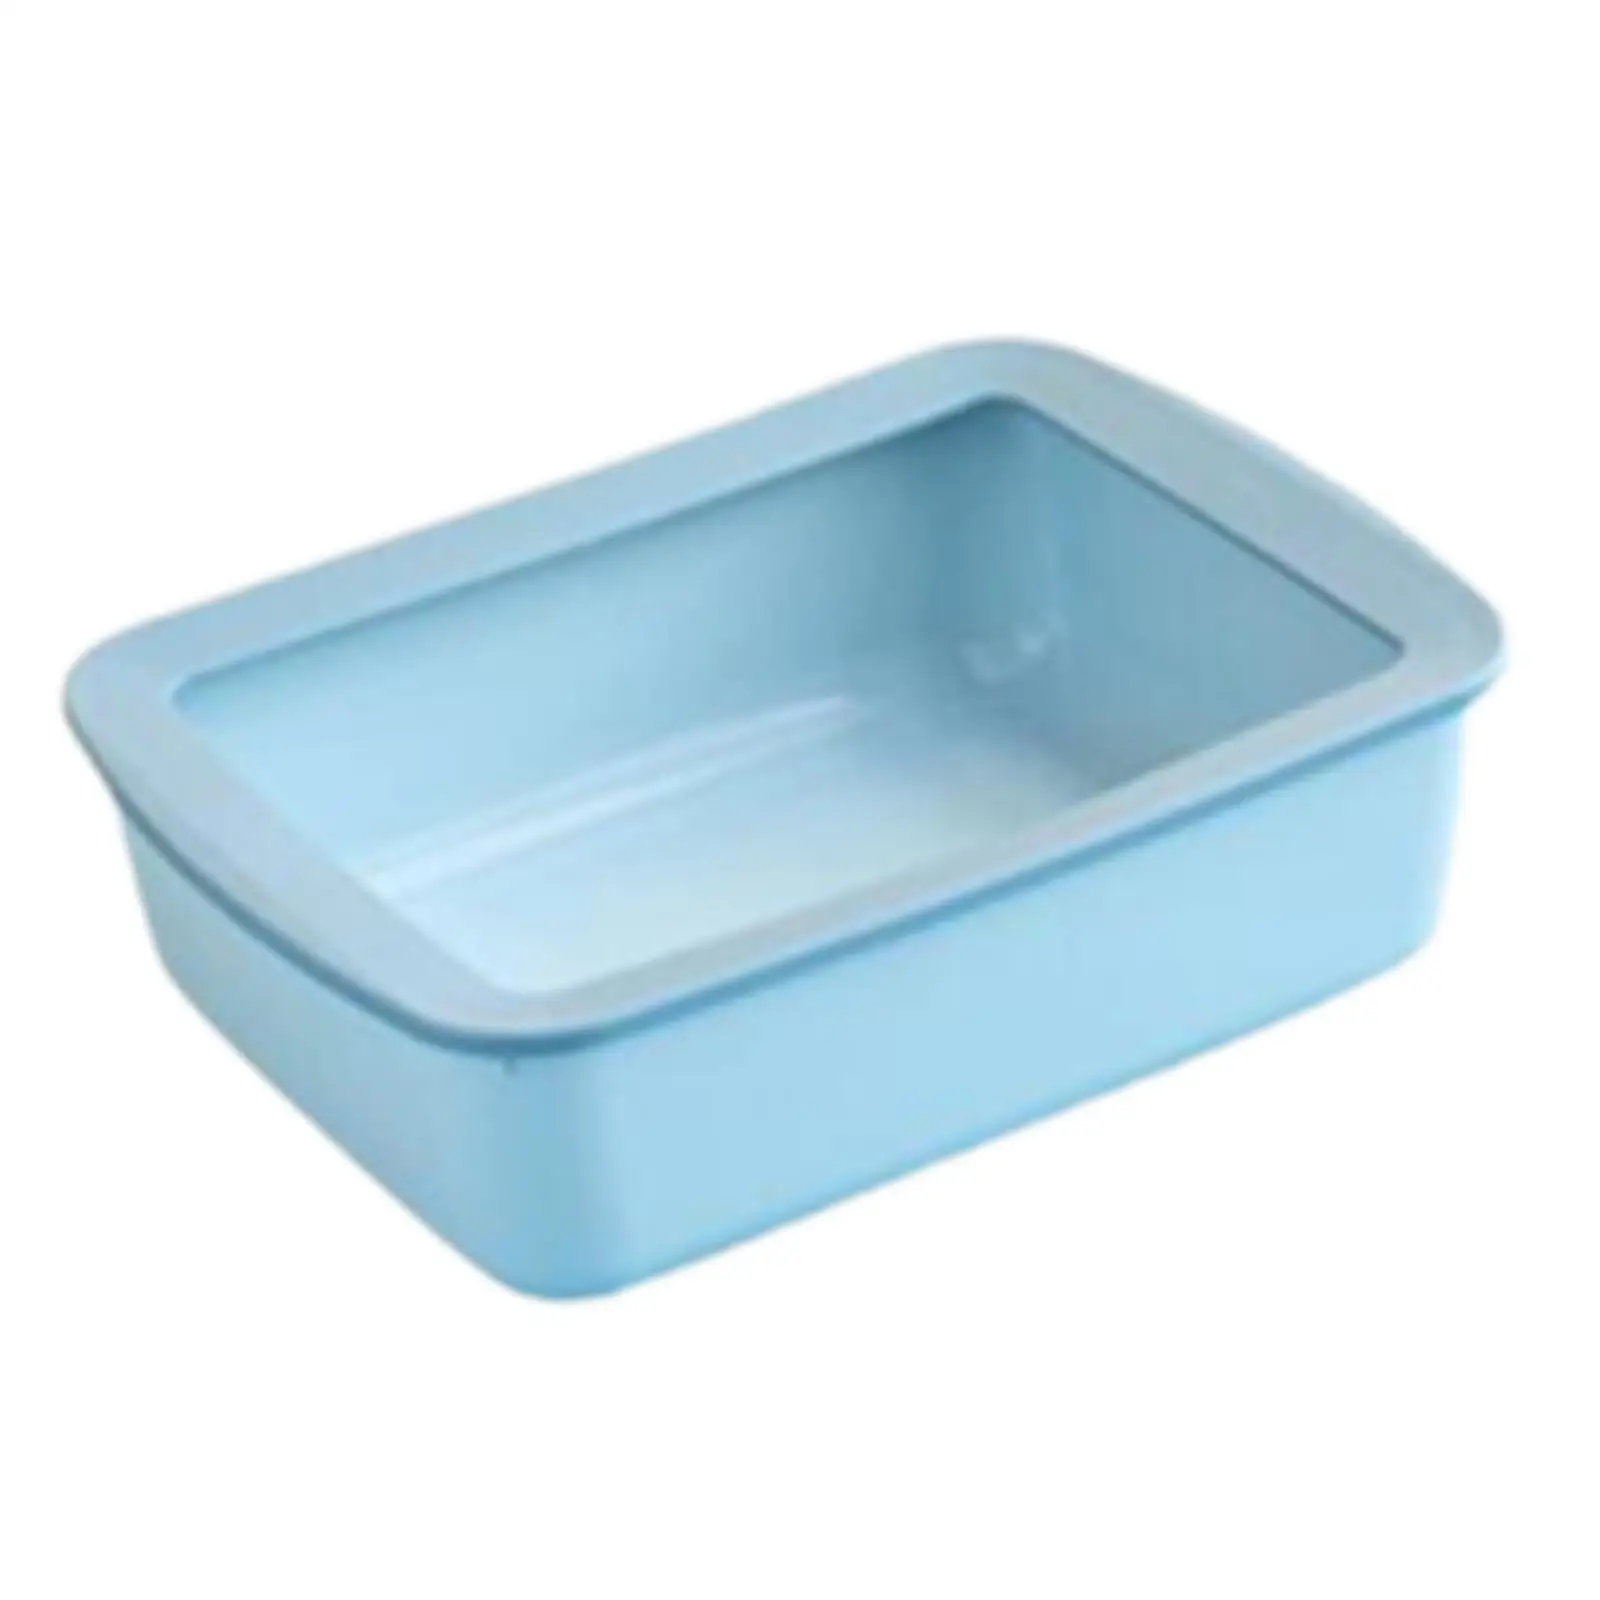 Cat Litter Box Indoor Cats Potty Toilet Deep Loo Easy to Clean Sand Box Pet Litter Tray for Small Cats Pet Supplies Kitten